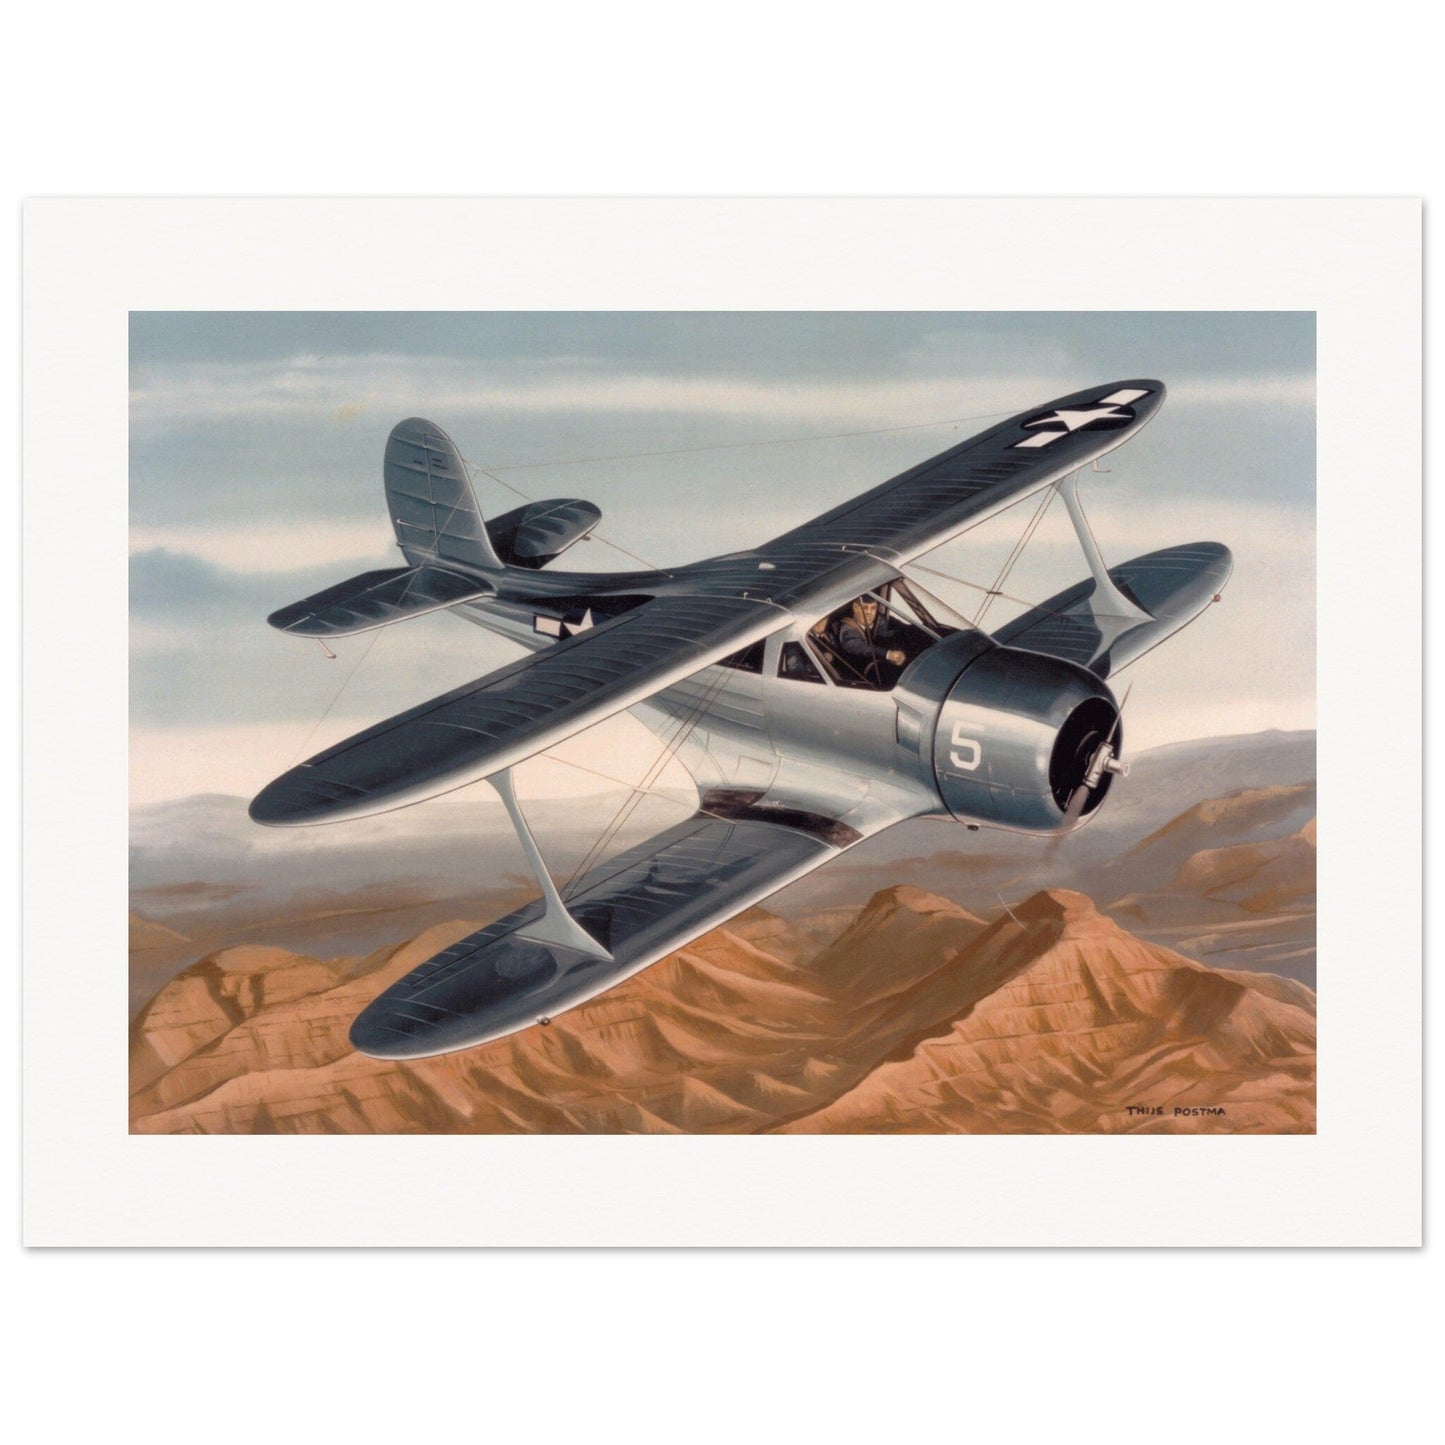 Thijs Postma - Poster - Beechcraft 17 Staggerwing USN Poster Only TP Aviation Art 60x80 cm / 24x32″ 